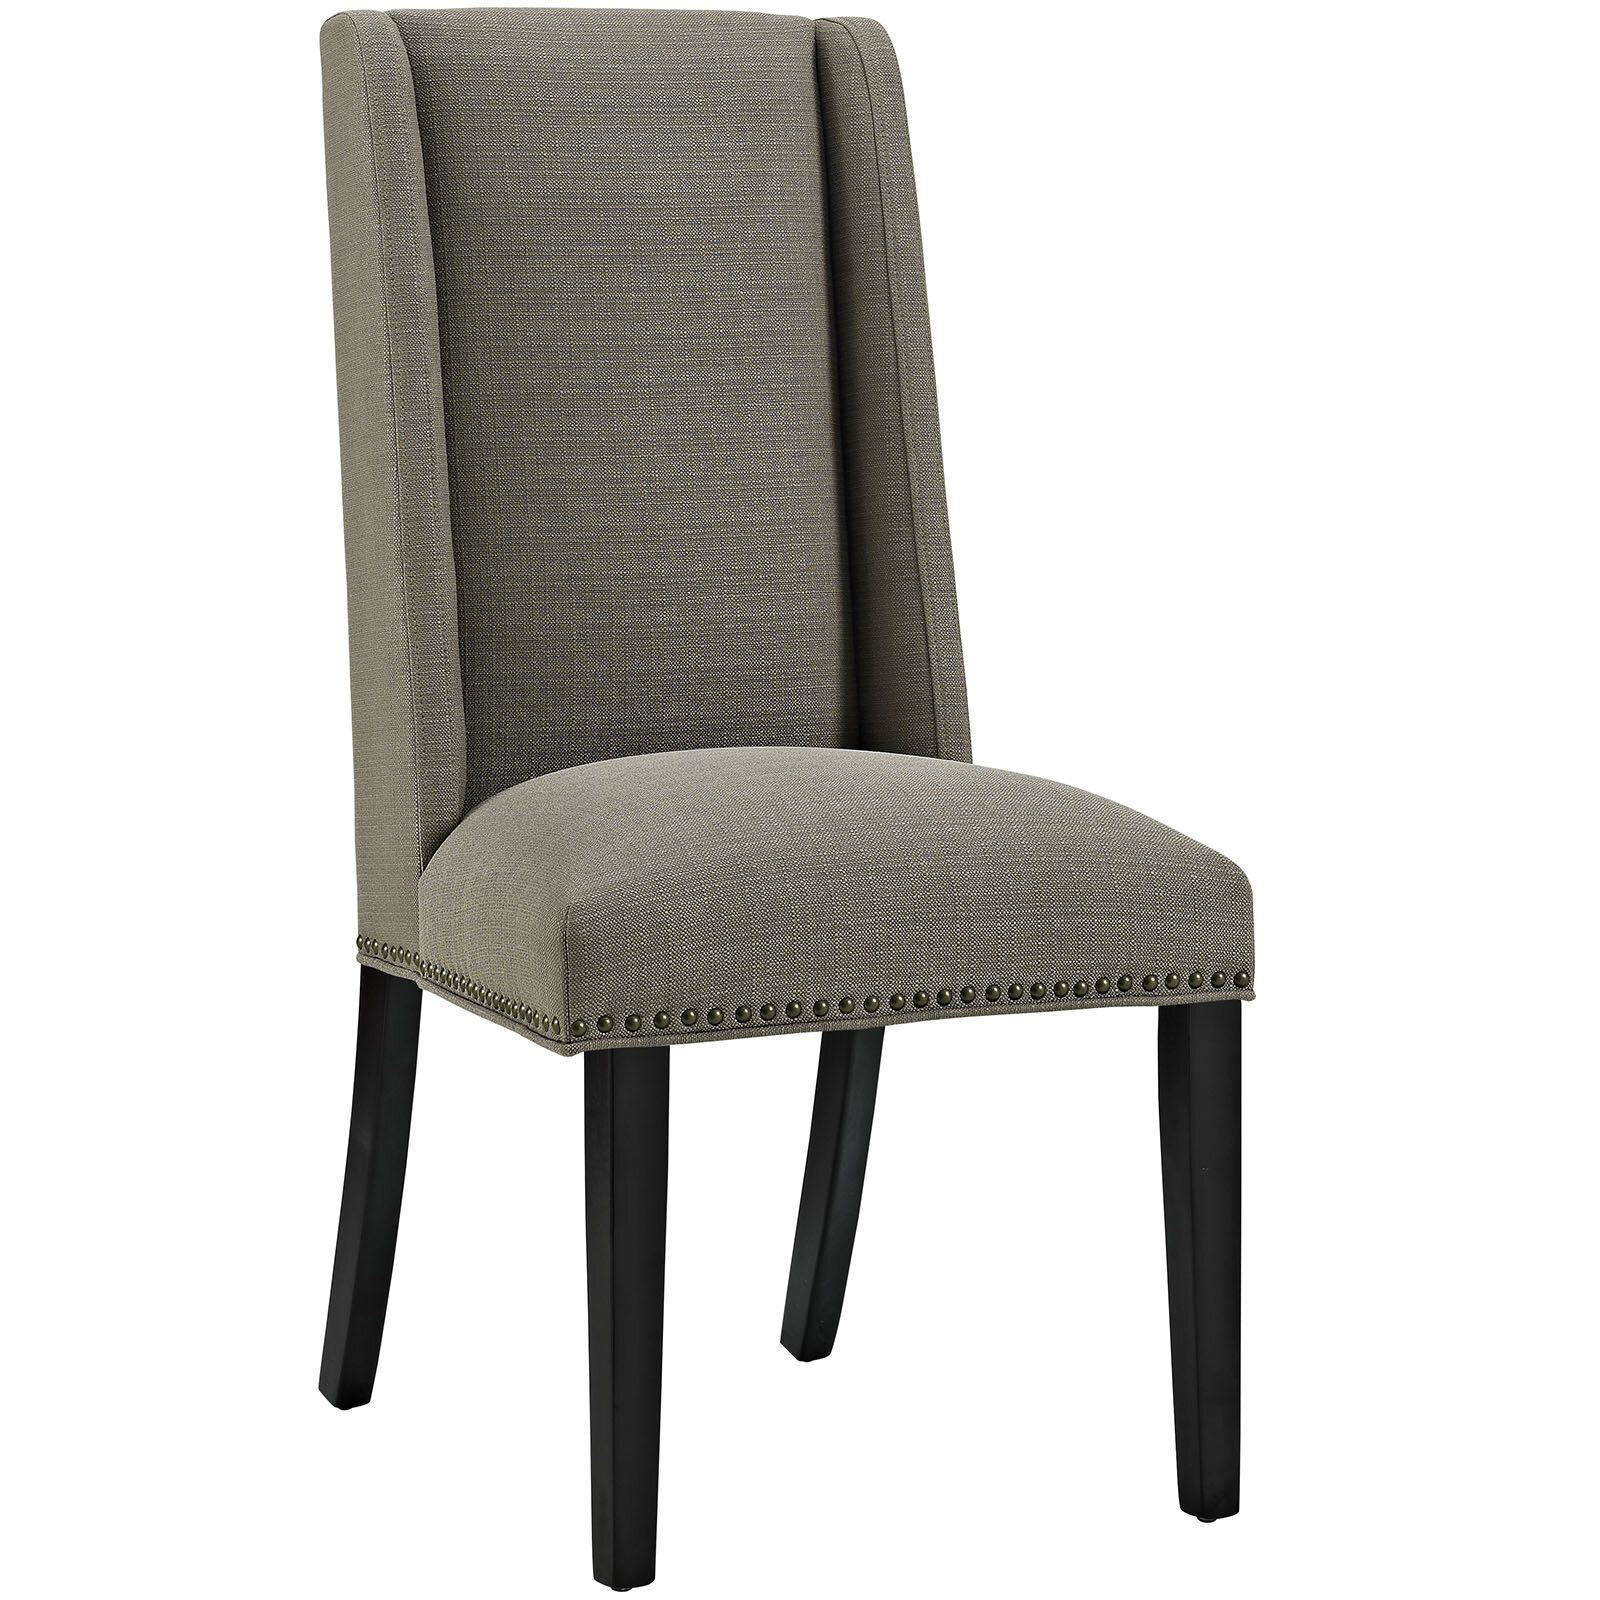 Galewood Wood Leg Upholstered Dining Chair In Carlton Wood Leg Upholstered Dining Chairs (Photo 10 of 15)